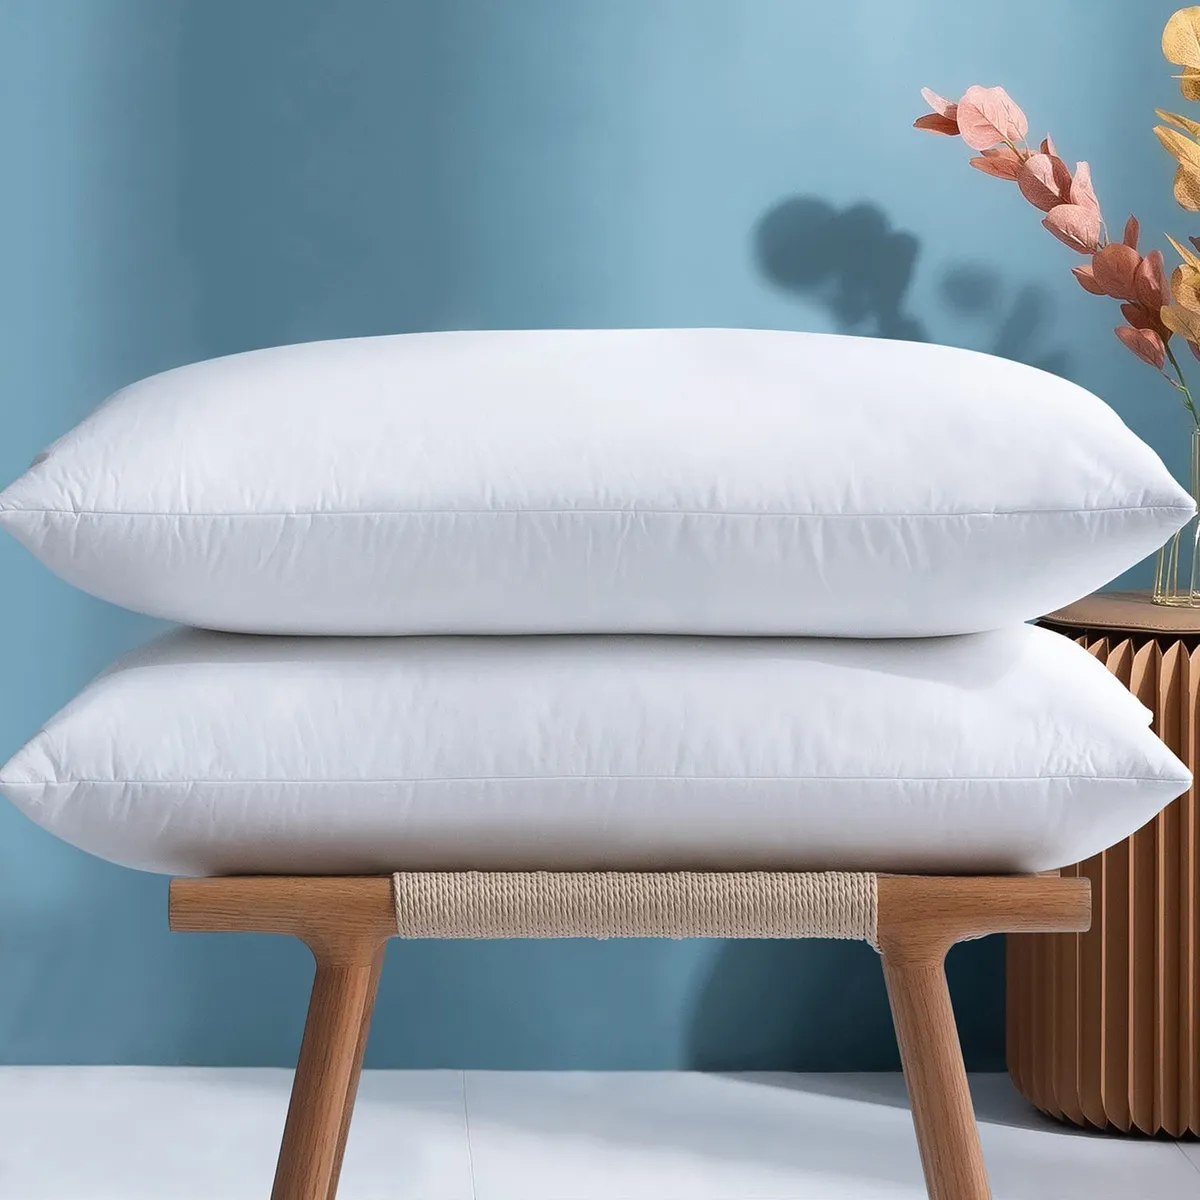 Two feather pillows on stool